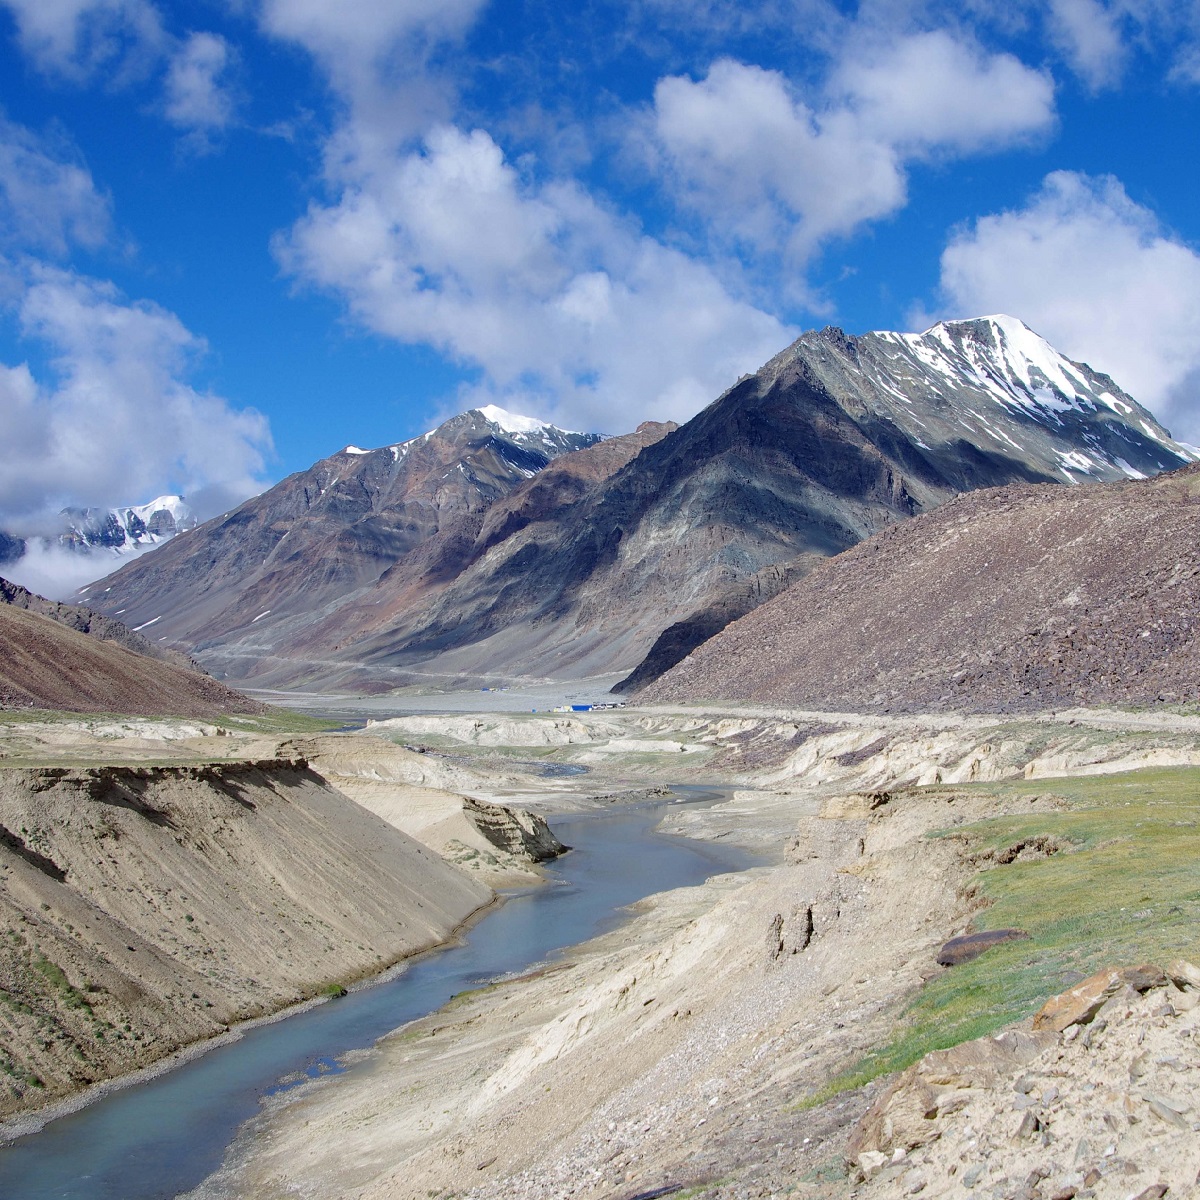 Landscape between Sarchu and Manali 1200